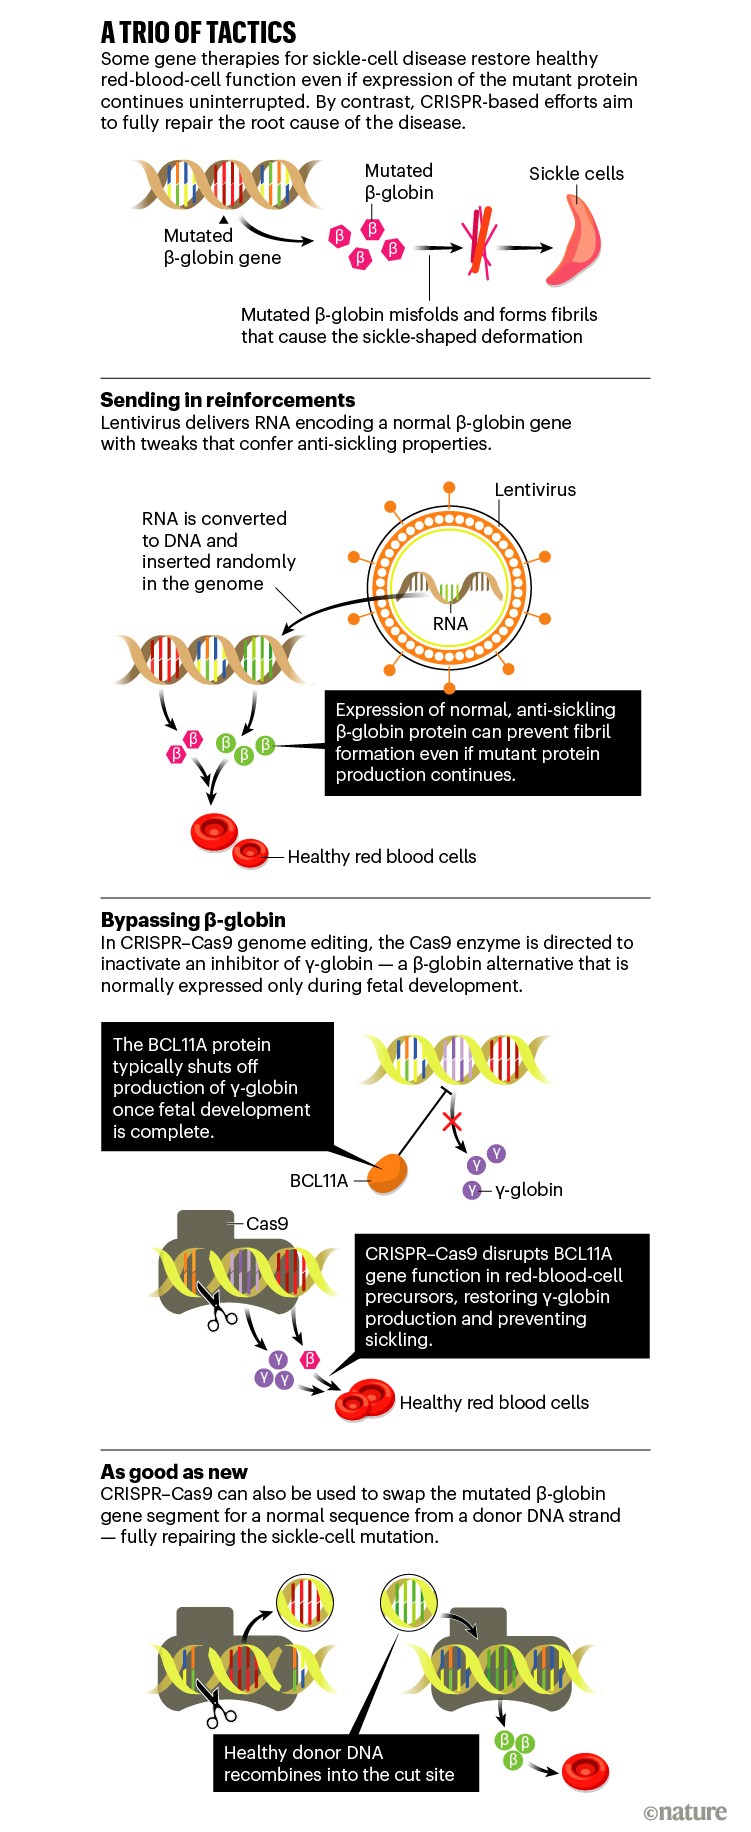 Graphic showing three tactics for using gene therapy to treat sickle-cell disease